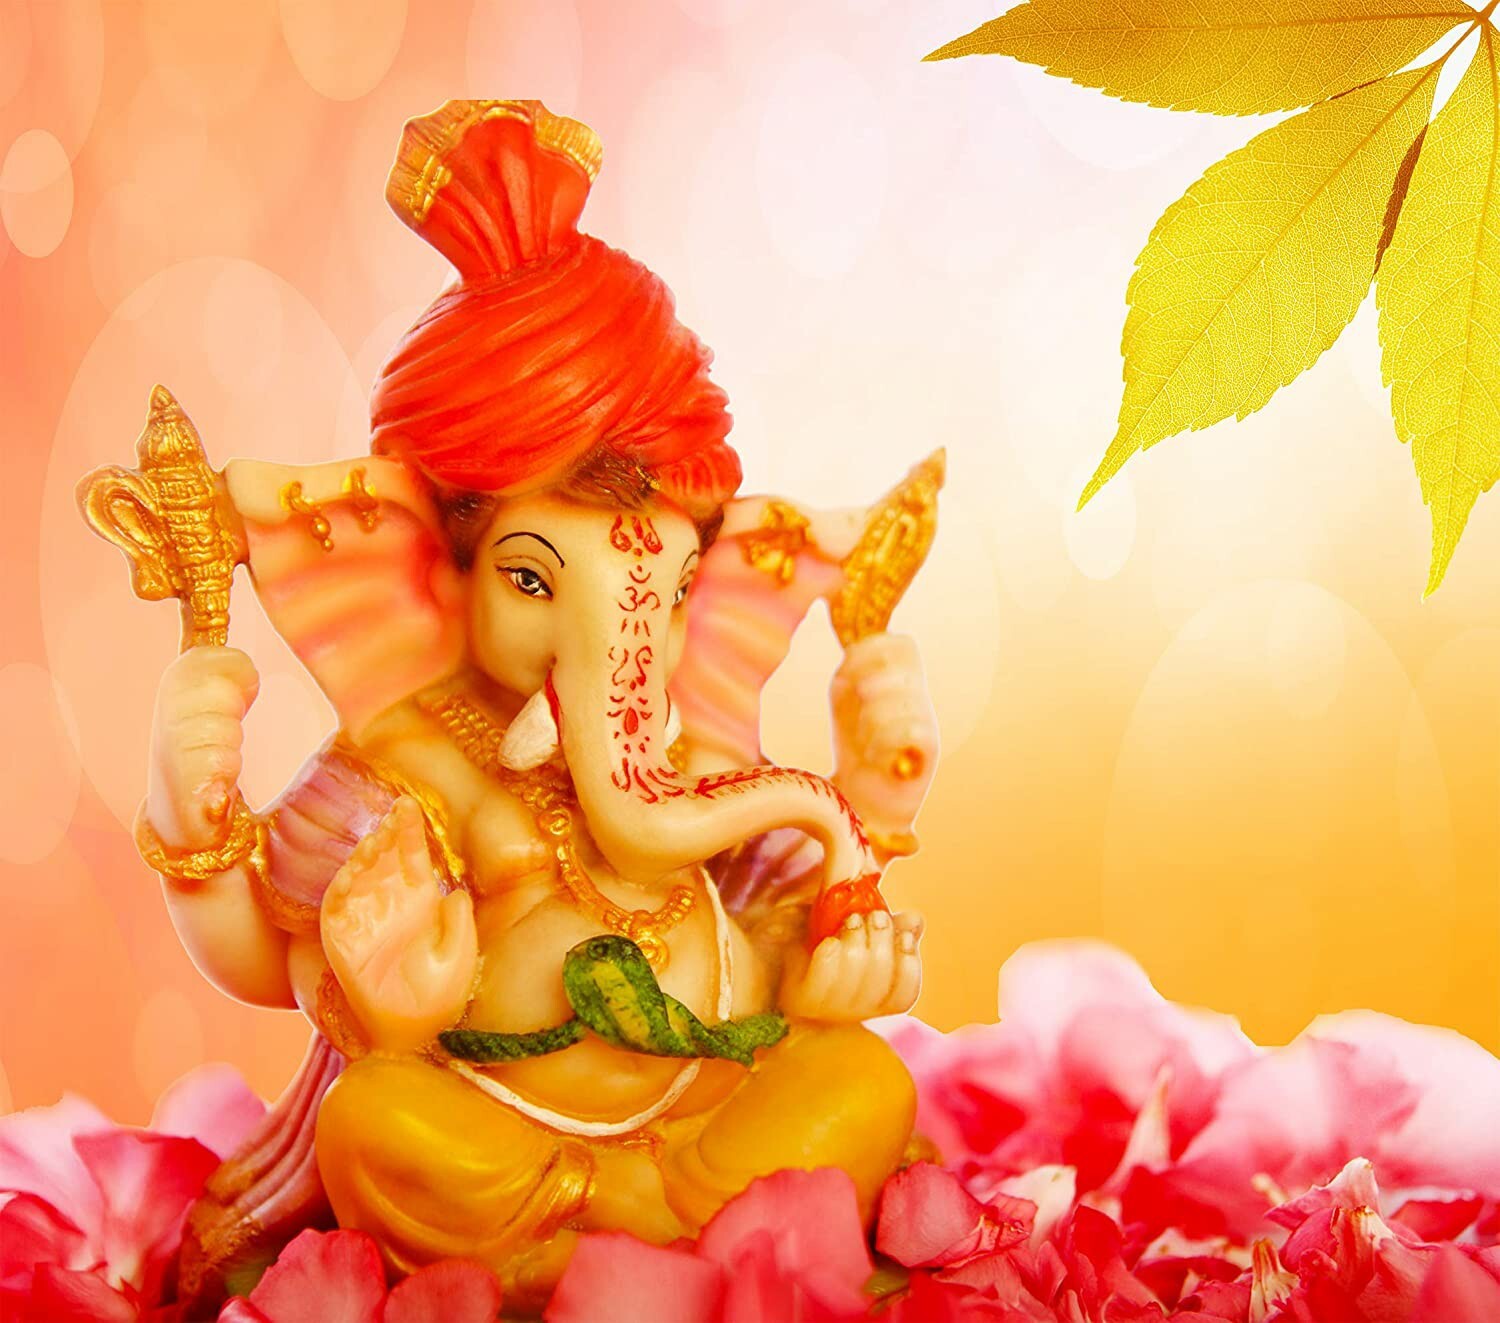 Cute Little Ganpati Images: A Stunning Collection of 999+ Images in Full 4K